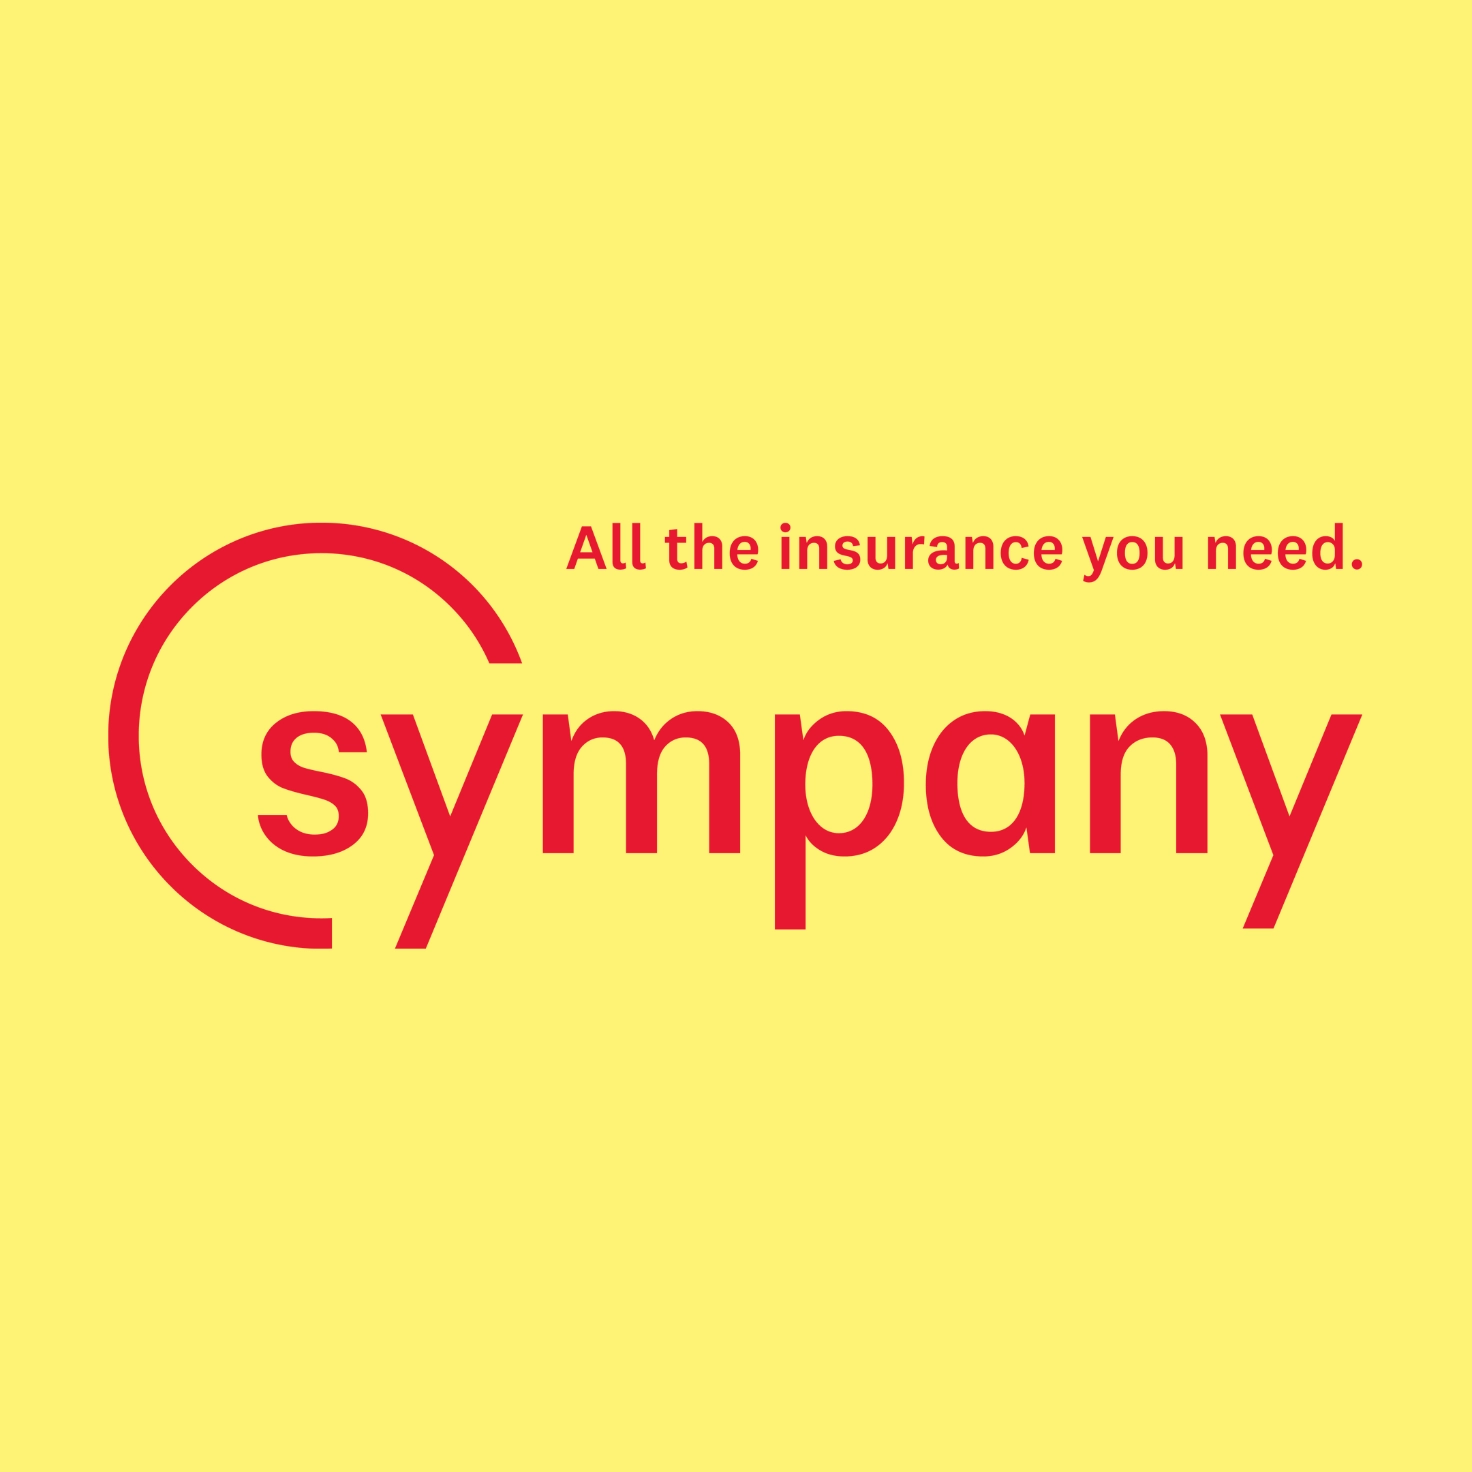 Logo of the insurer Sympany including the claim "All the insurance you need"